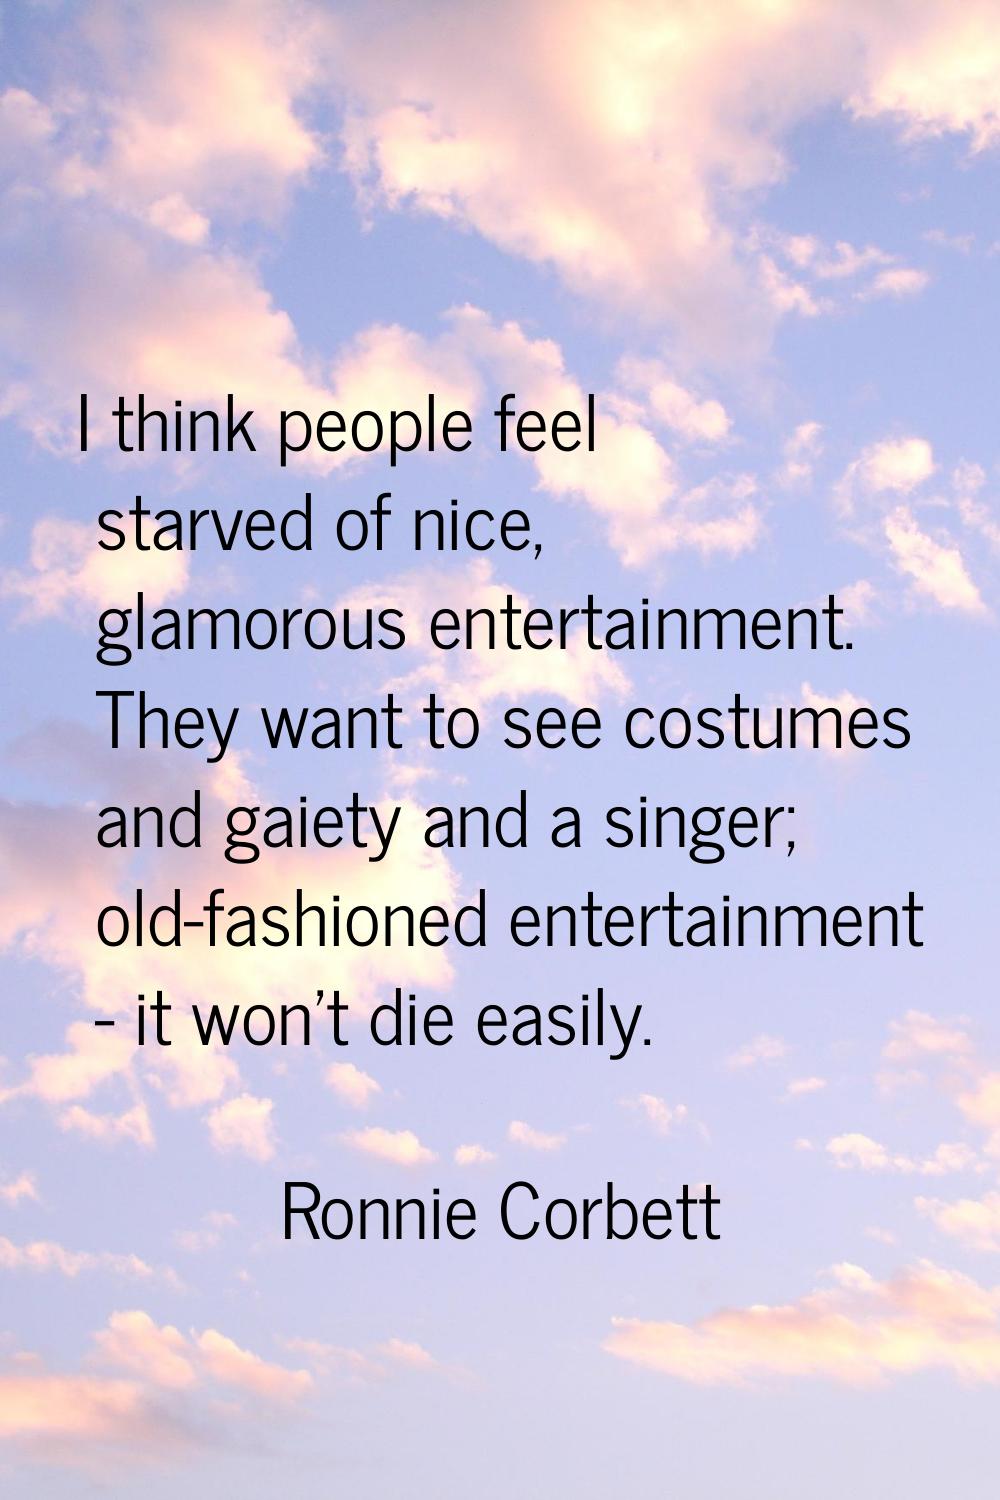 I think people feel starved of nice, glamorous entertainment. They want to see costumes and gaiety 